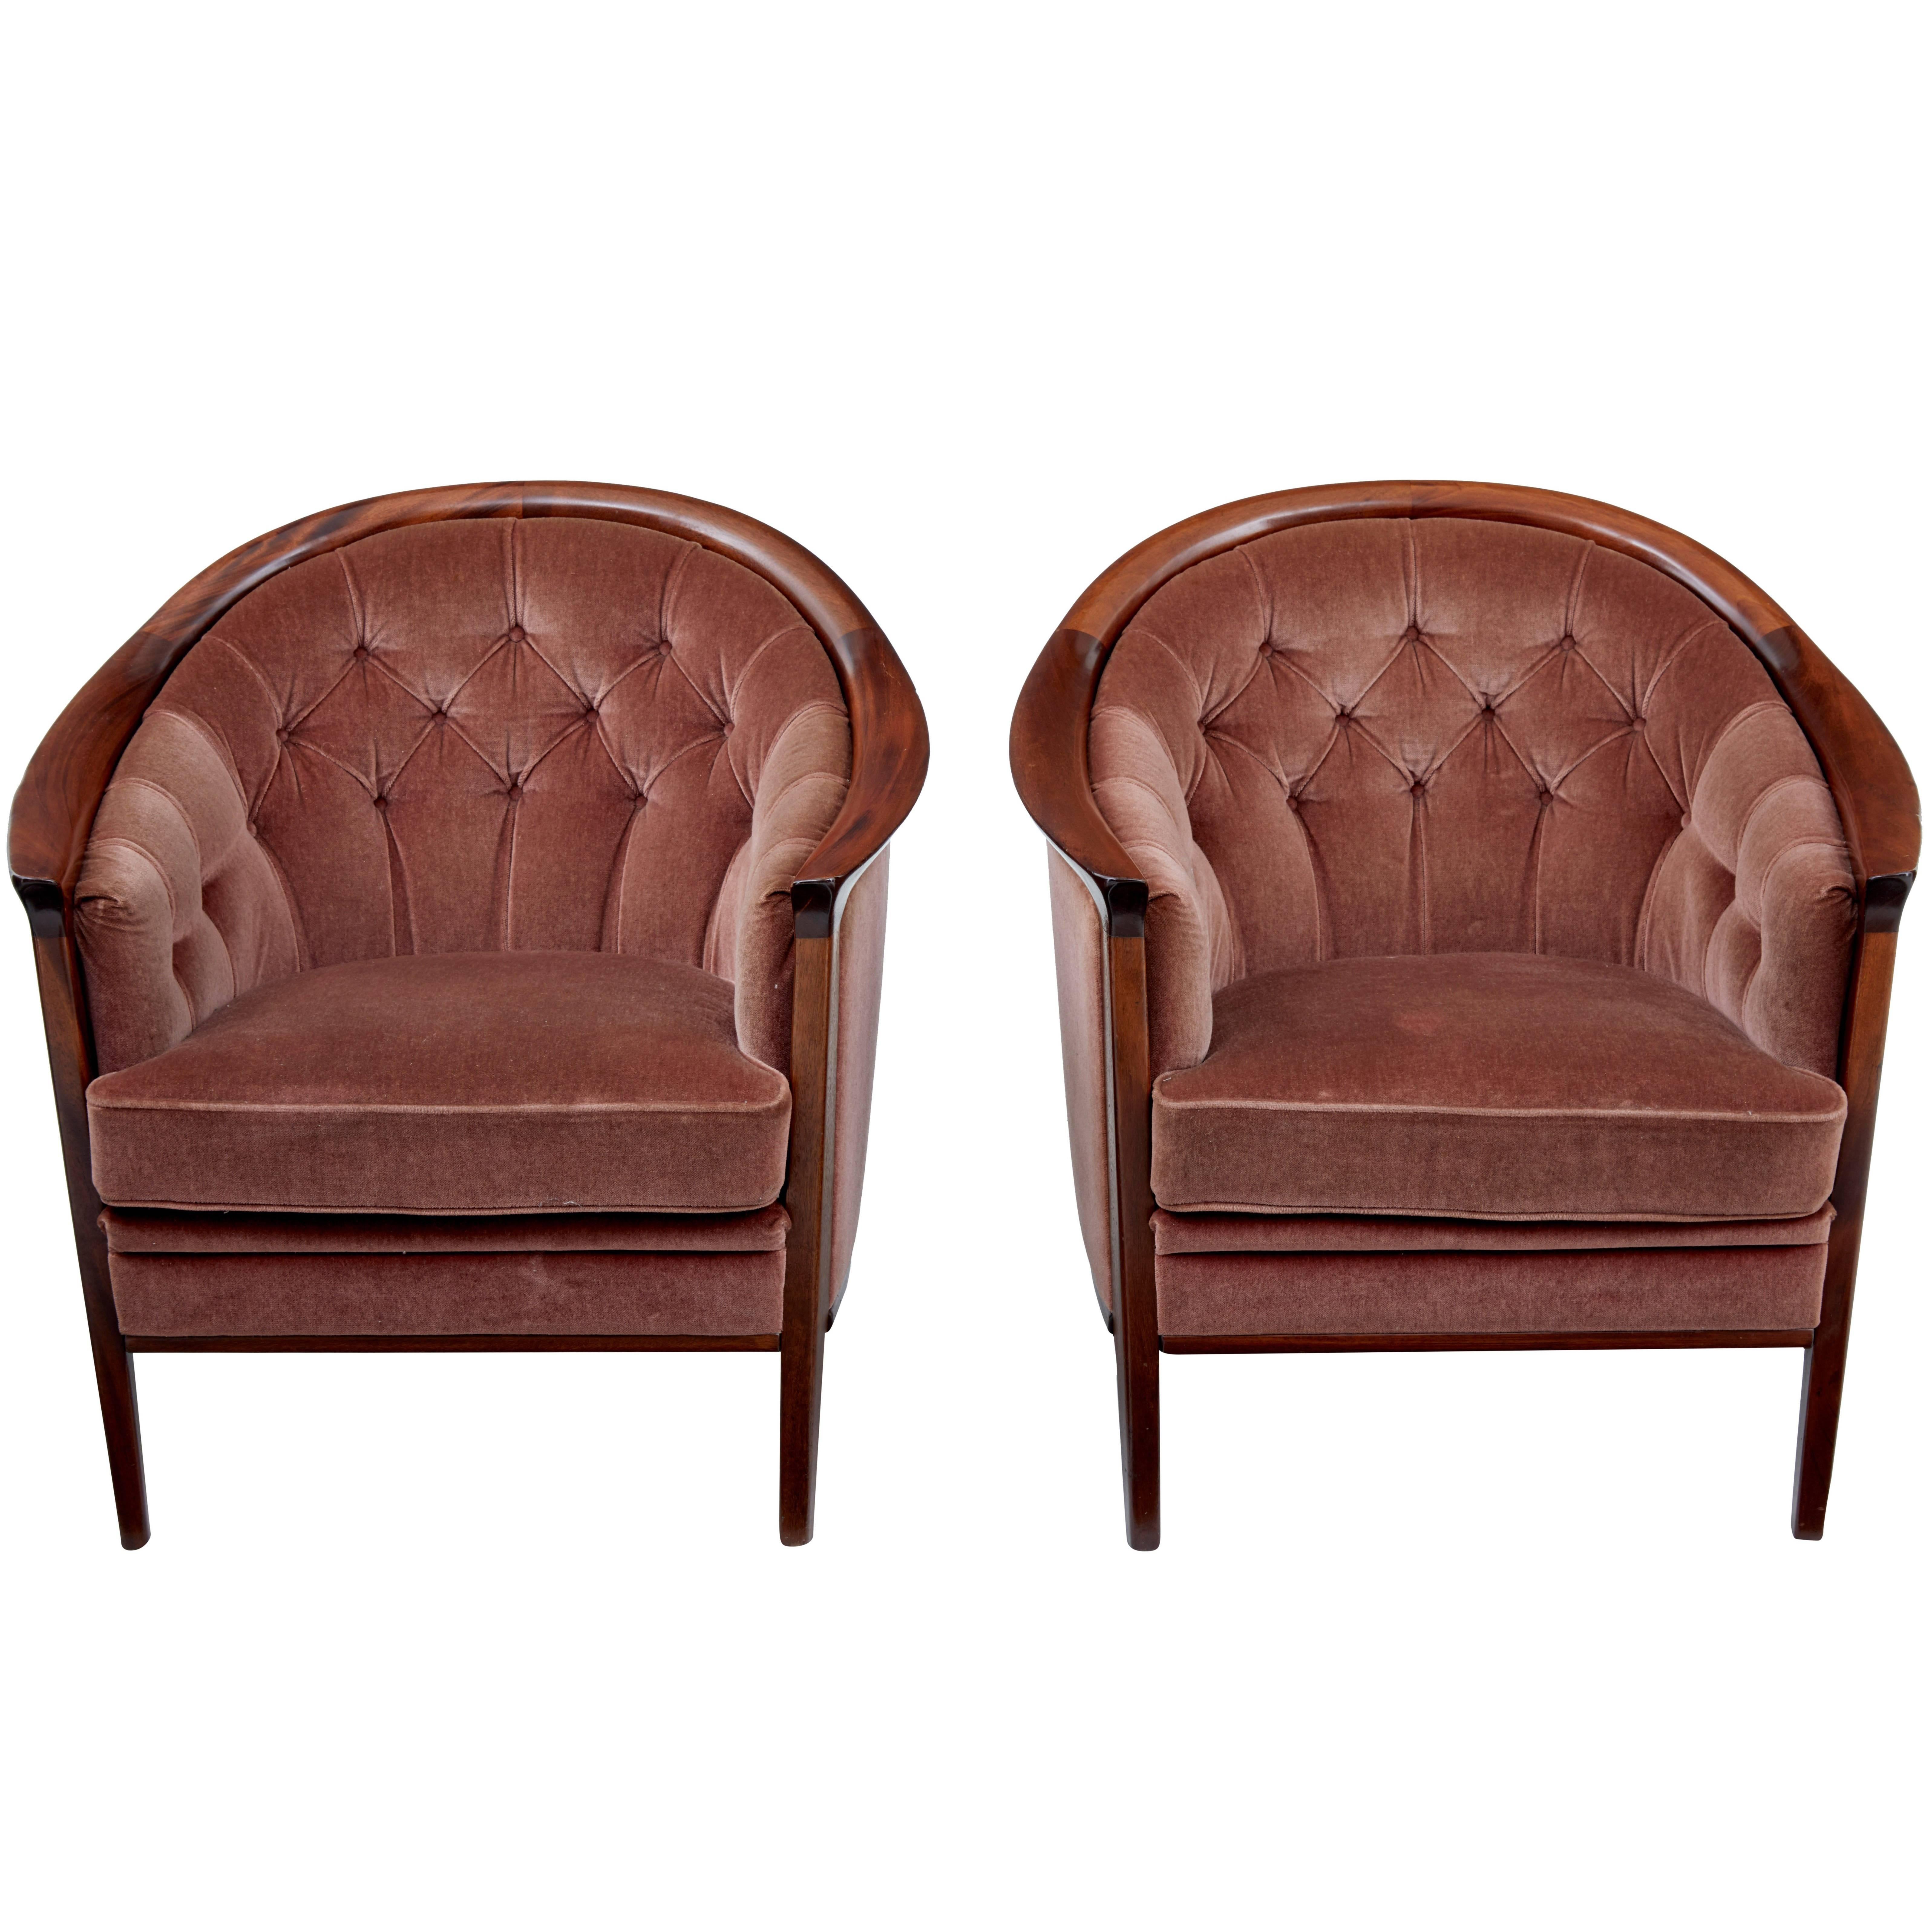 Pair of 1960s Swedish Andersson Armchairs